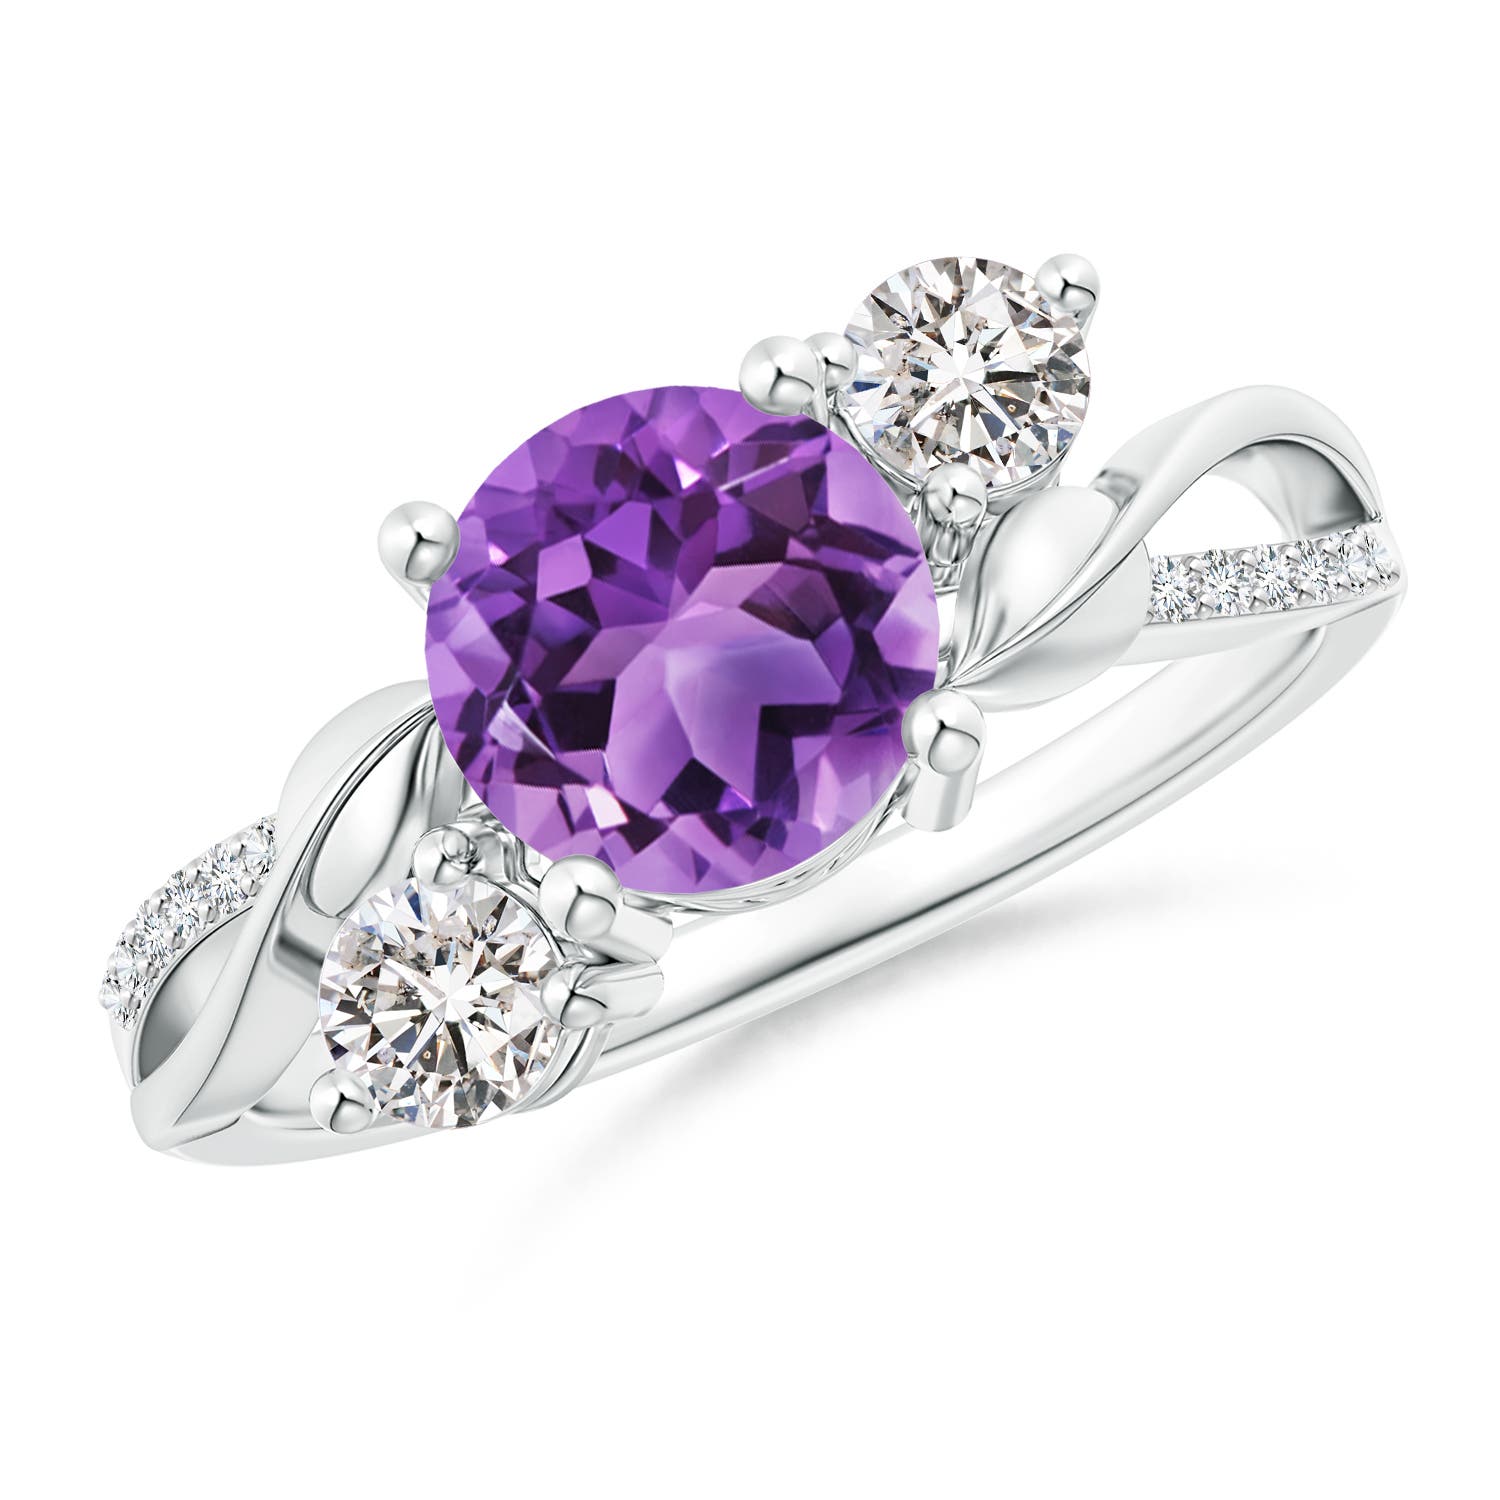 AA - Amethyst / 1.53 CT / 14 KT White Gold